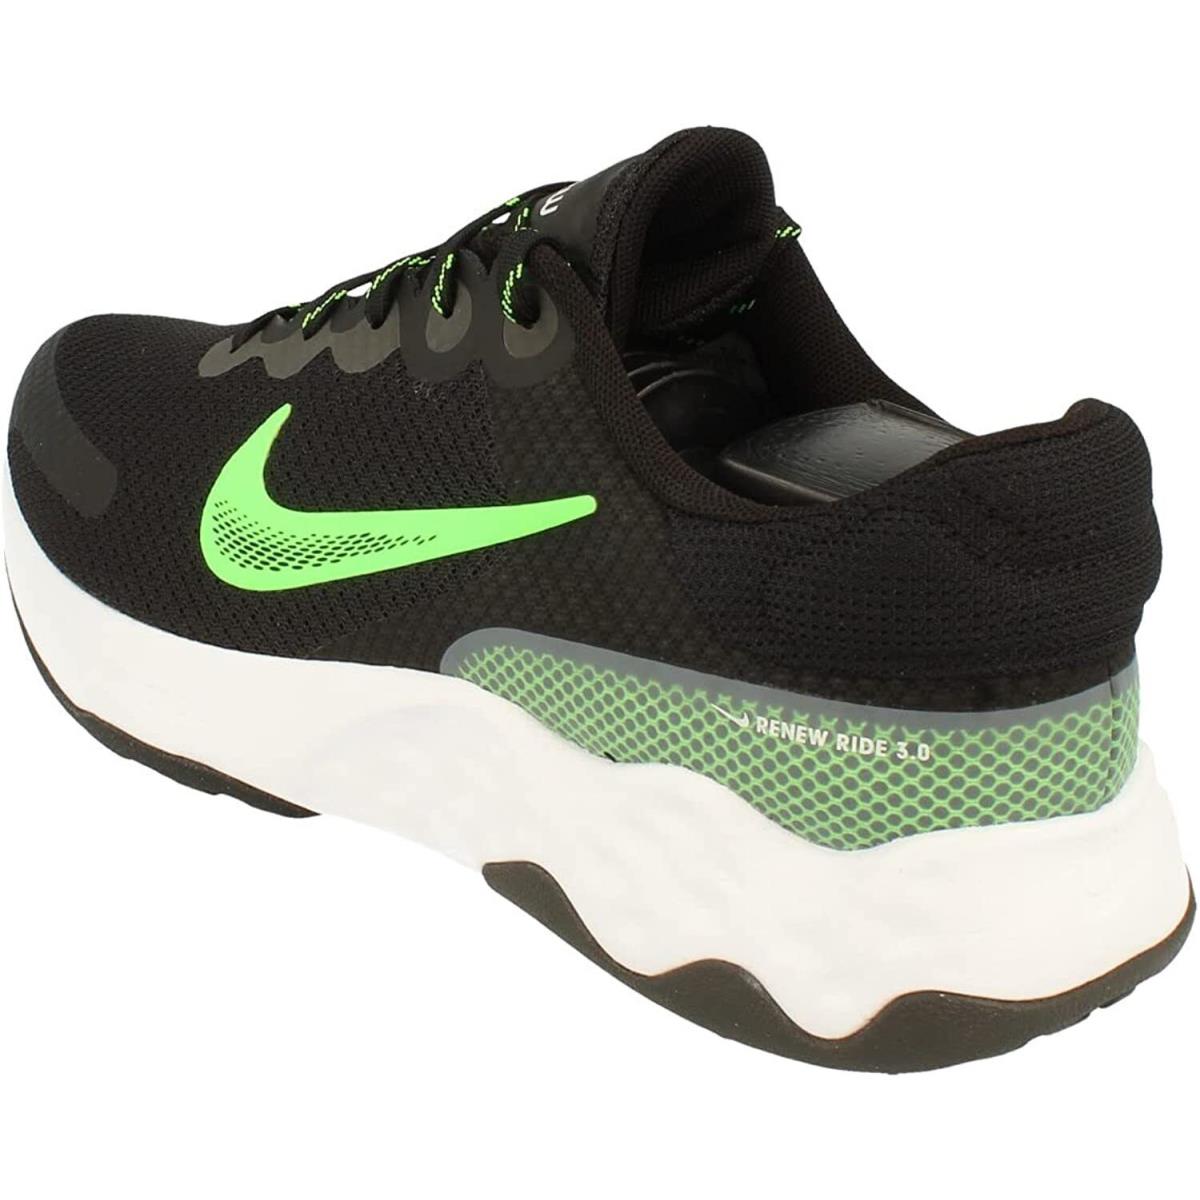 Nike Renew Ride 3 Mens Road Running Trainers Dc8185 003 Sneakers Shoes 9.5 12.5 - Black